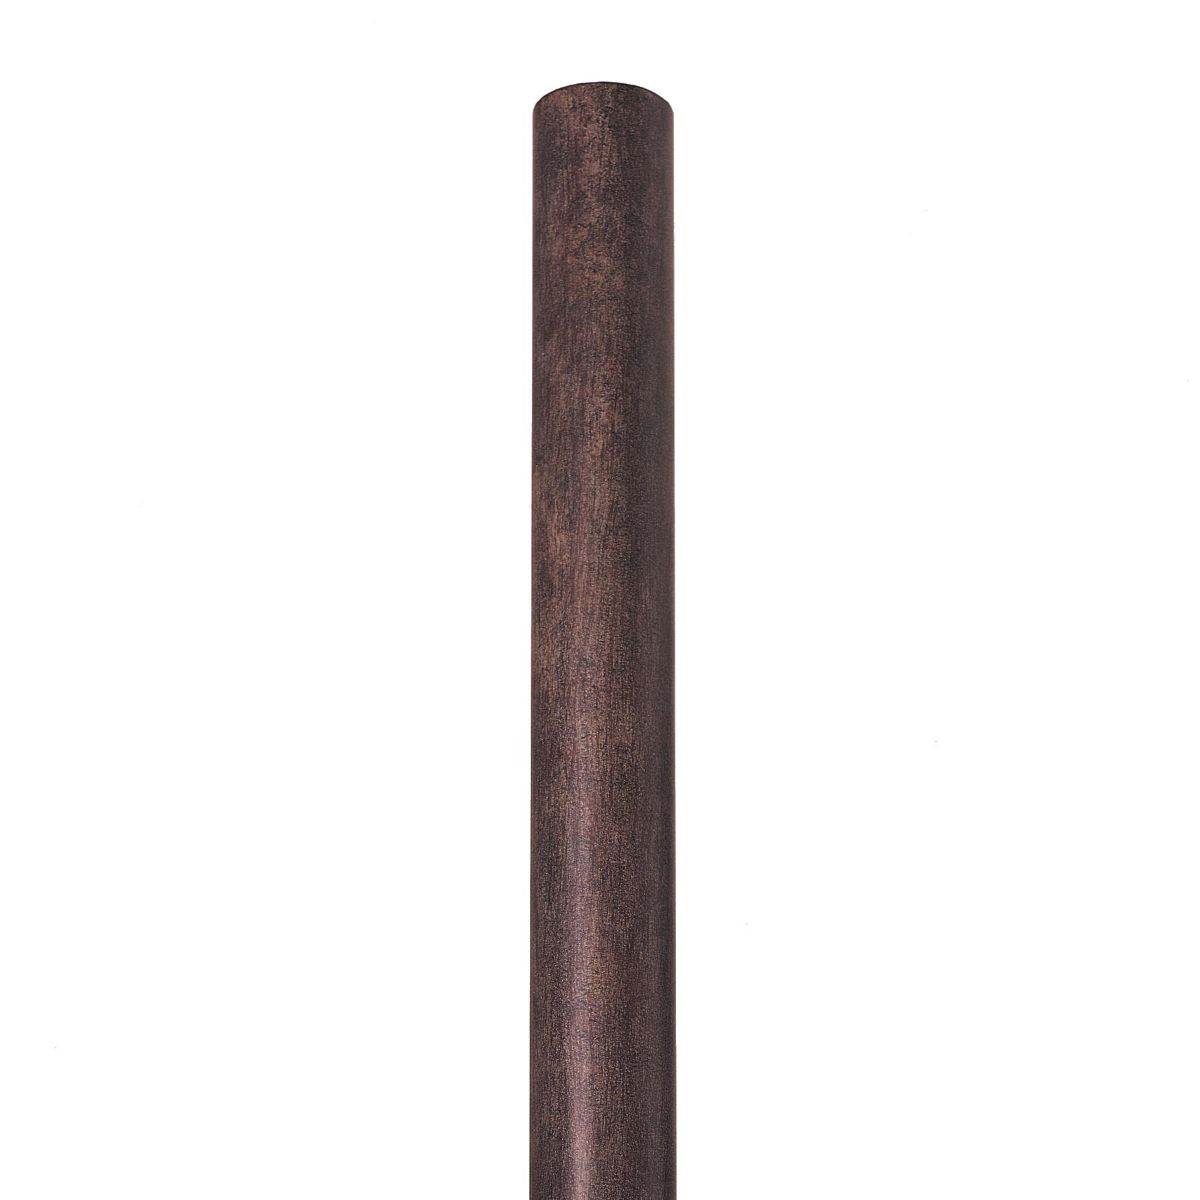 8 ft Round Aluminum Direct Burial Pole 3 In. Shaft Rust Finish